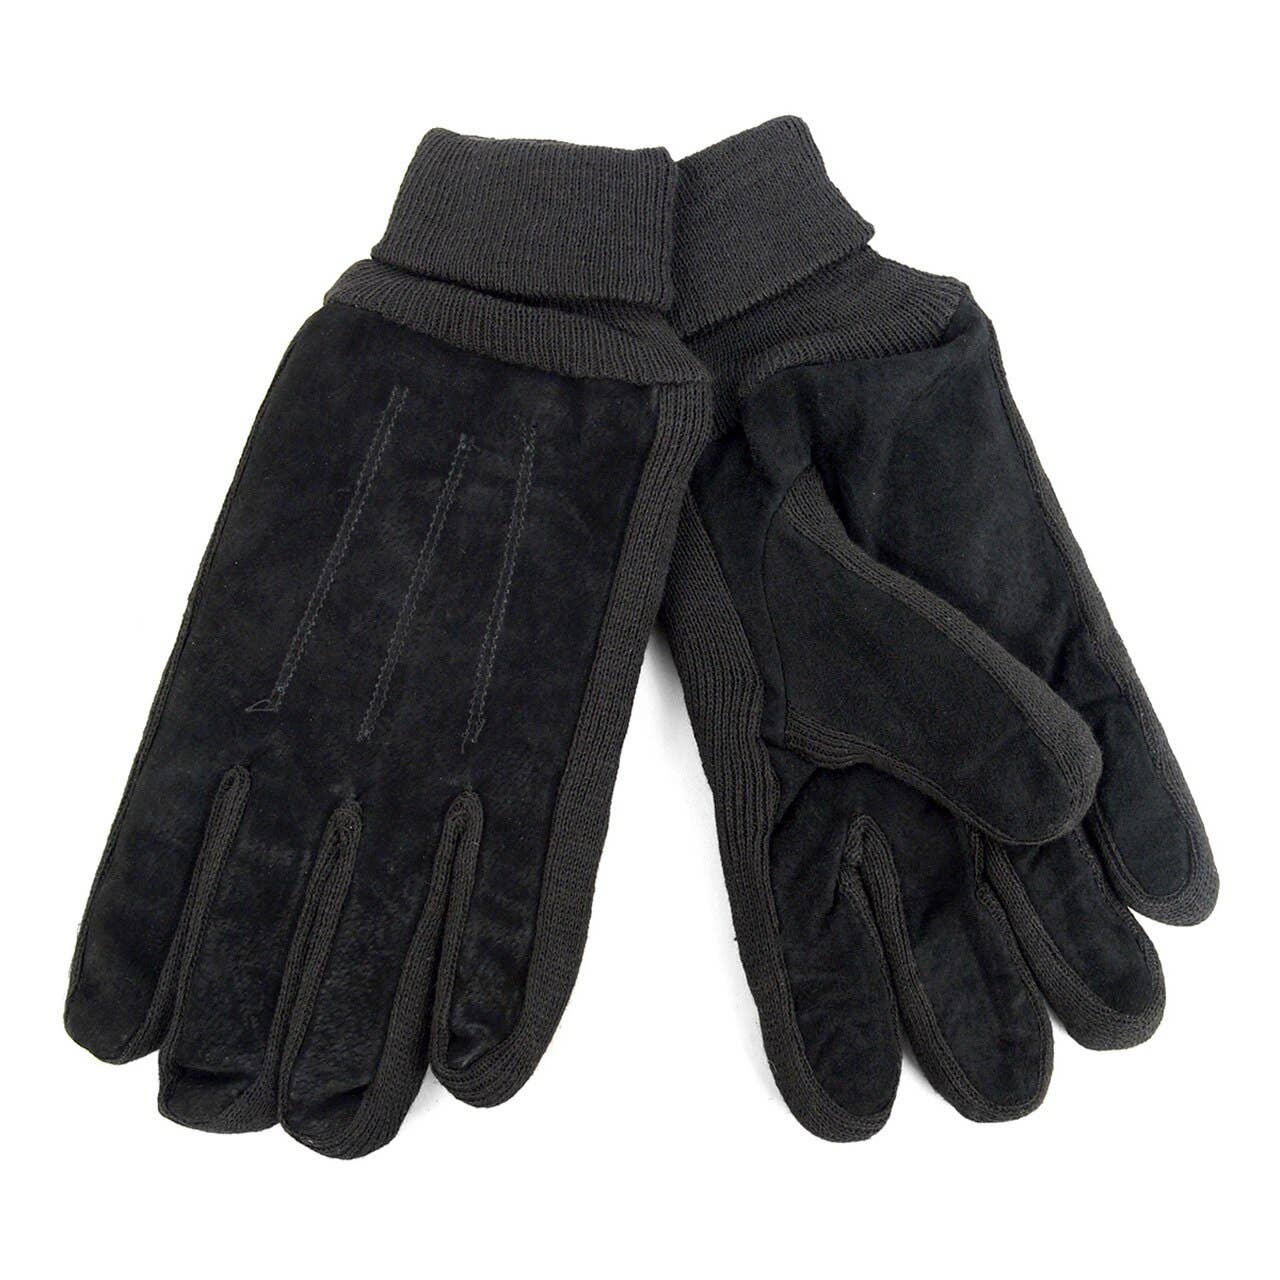 Men's Genuine Leather Winter Gloves with Soft Acrylic Lining: Black / L/XL